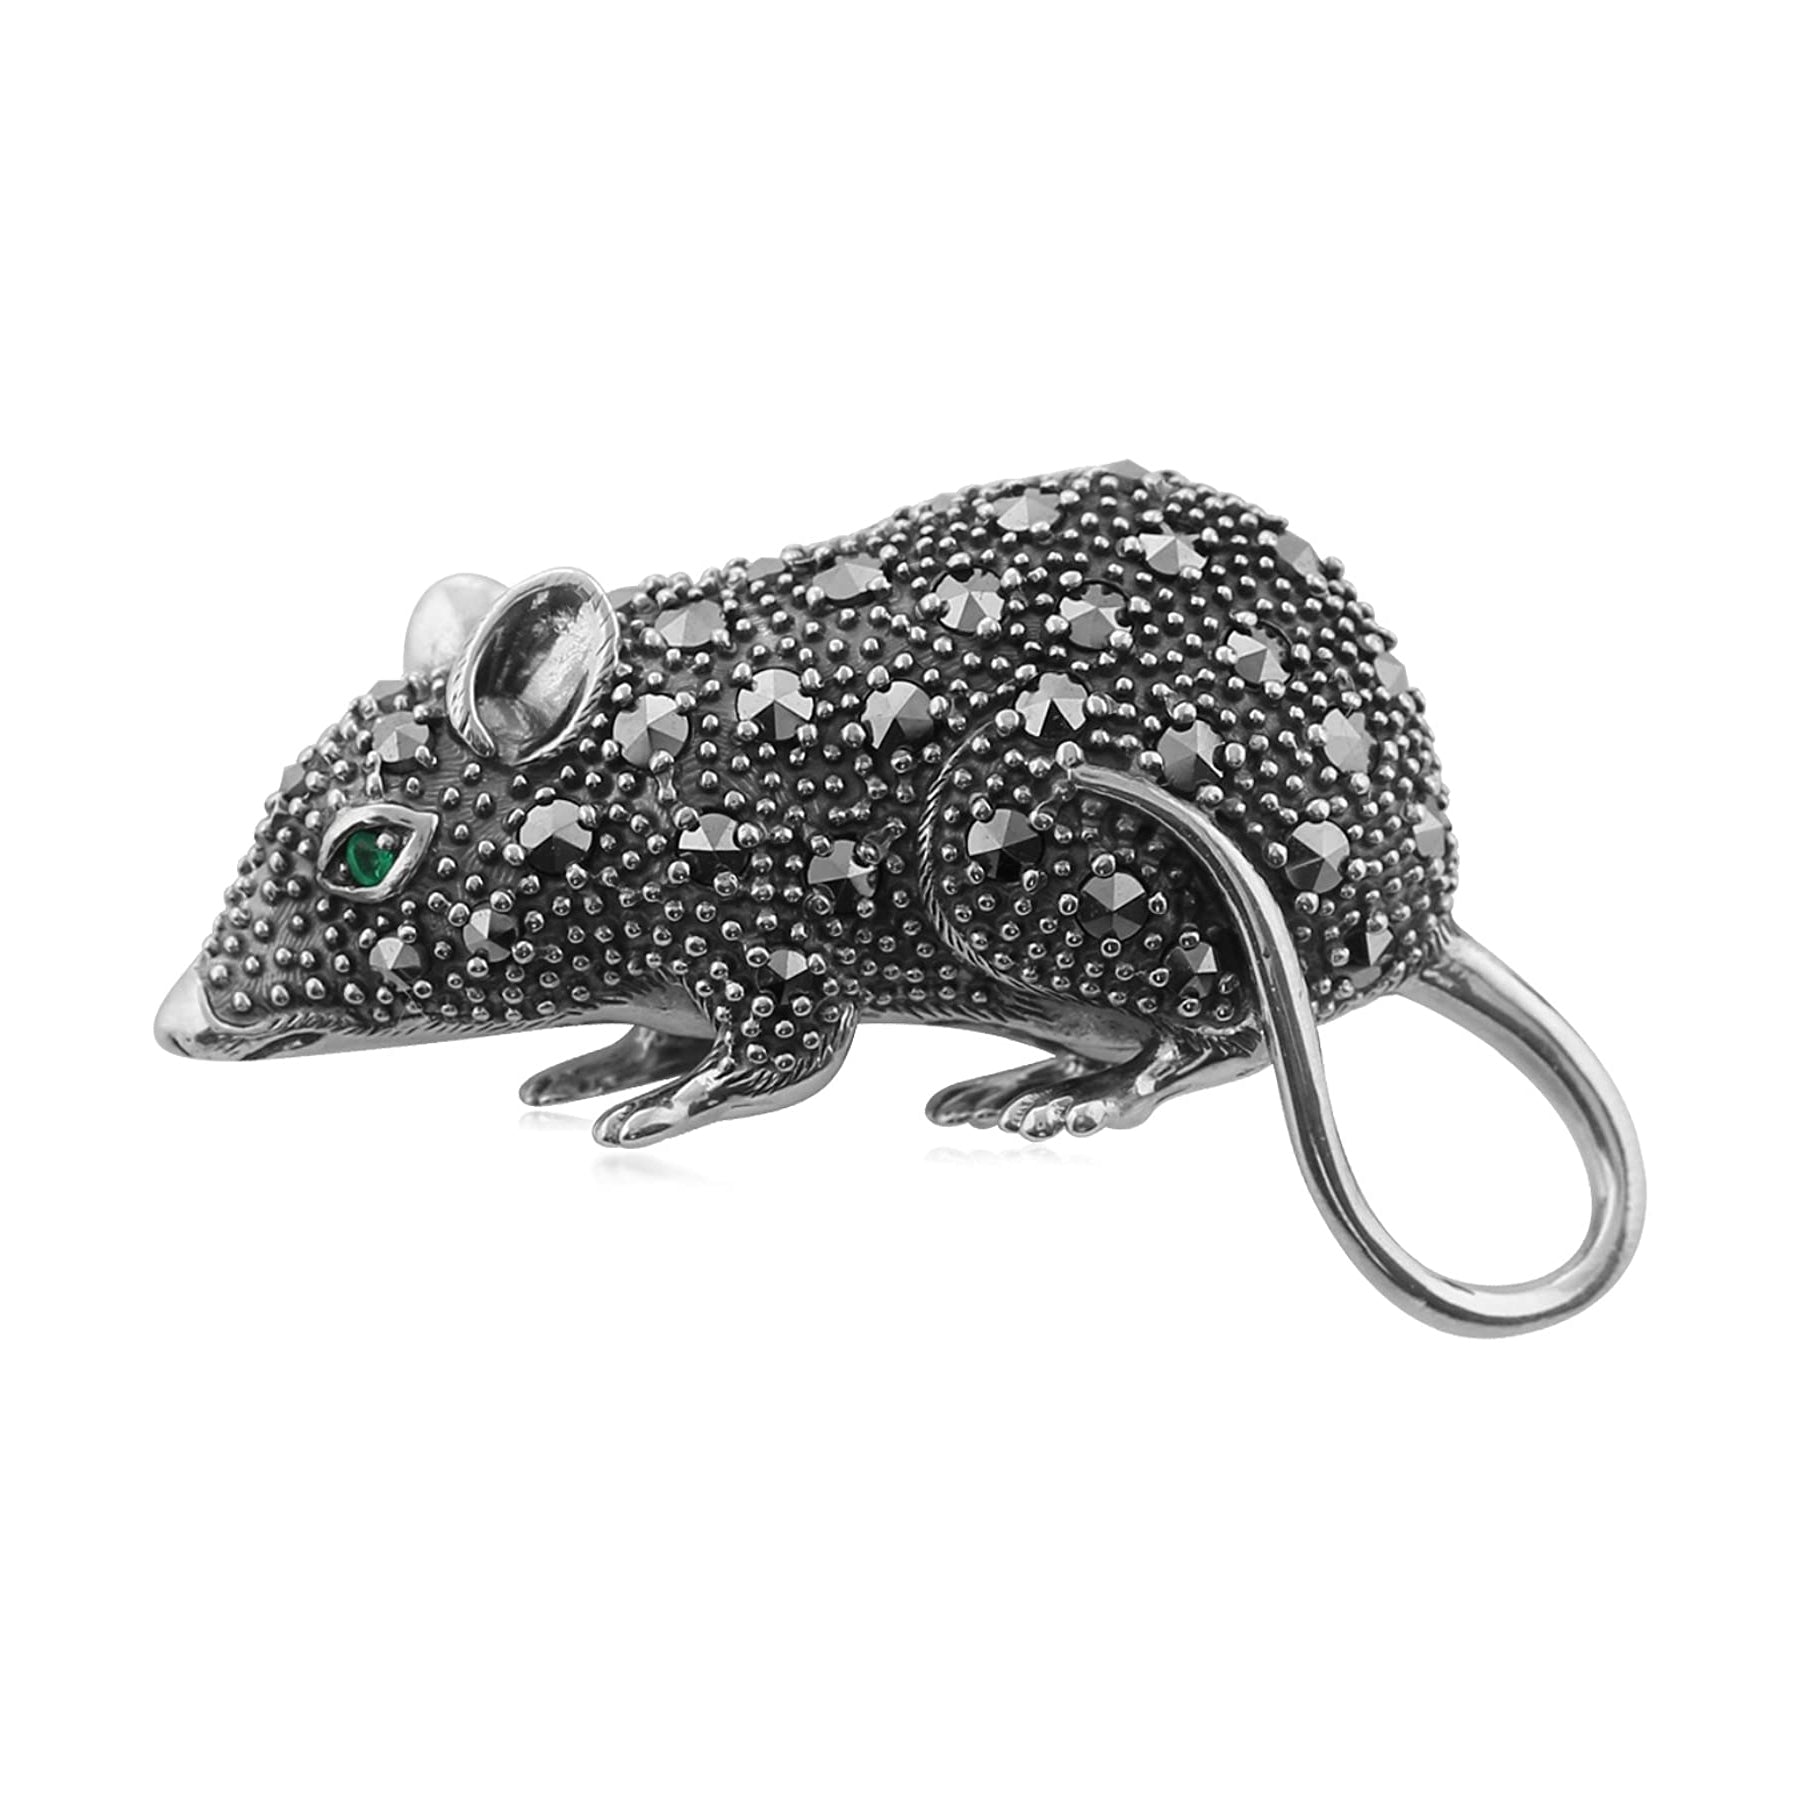 Marcasite & Emerald Mouse Brooch in 925 Sterling Silver